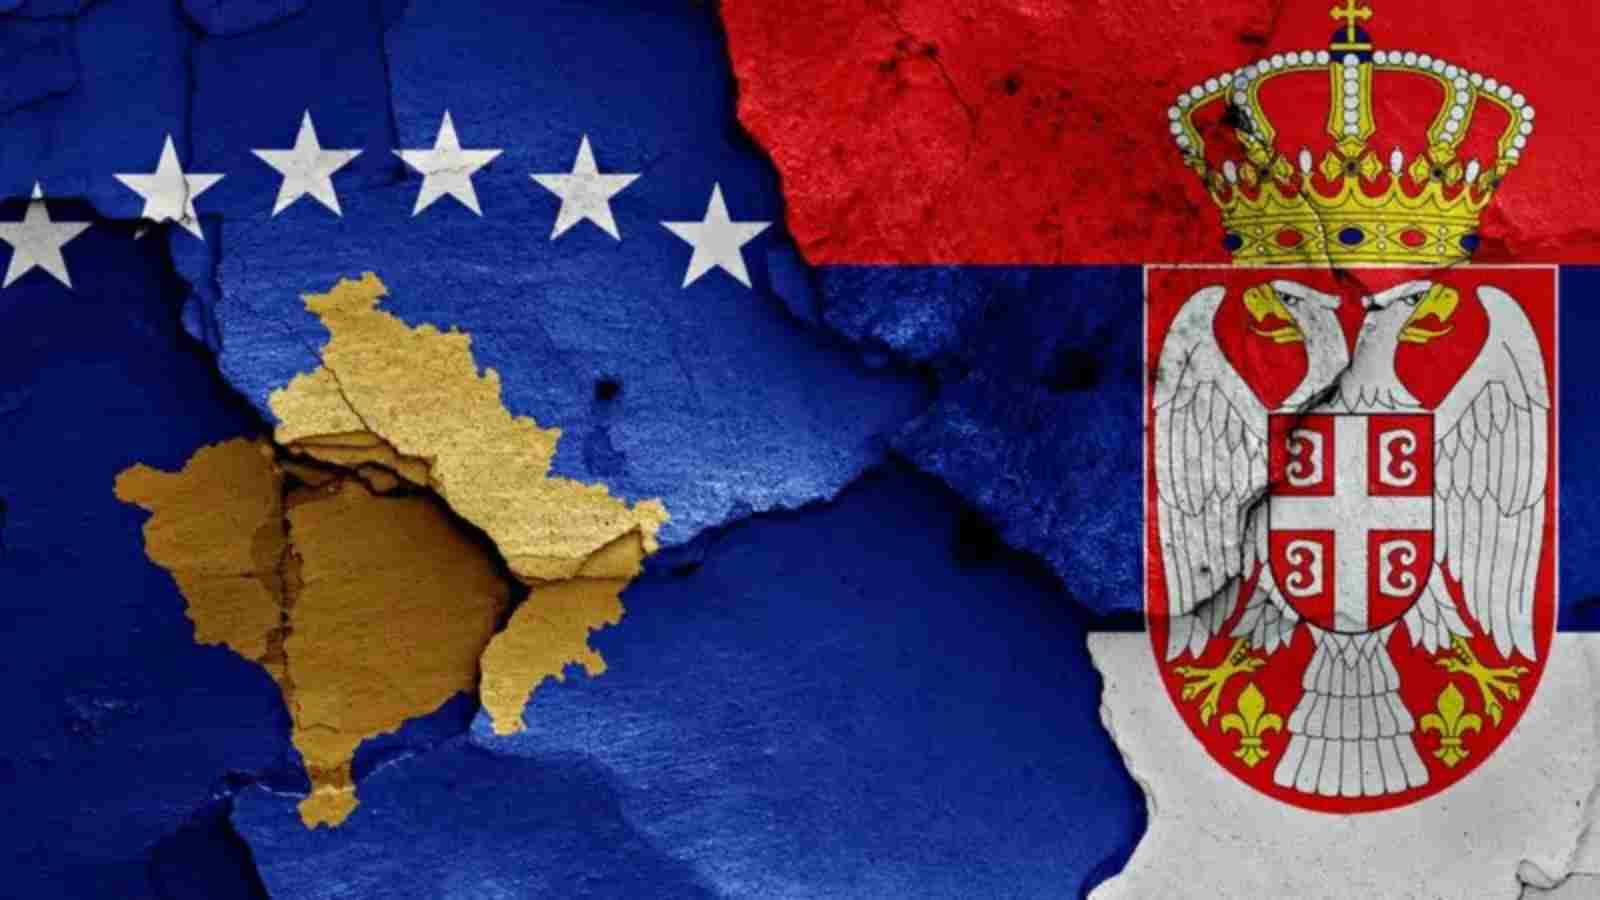 Serbs and Ethnic Albanians are at conflict in Kosovo